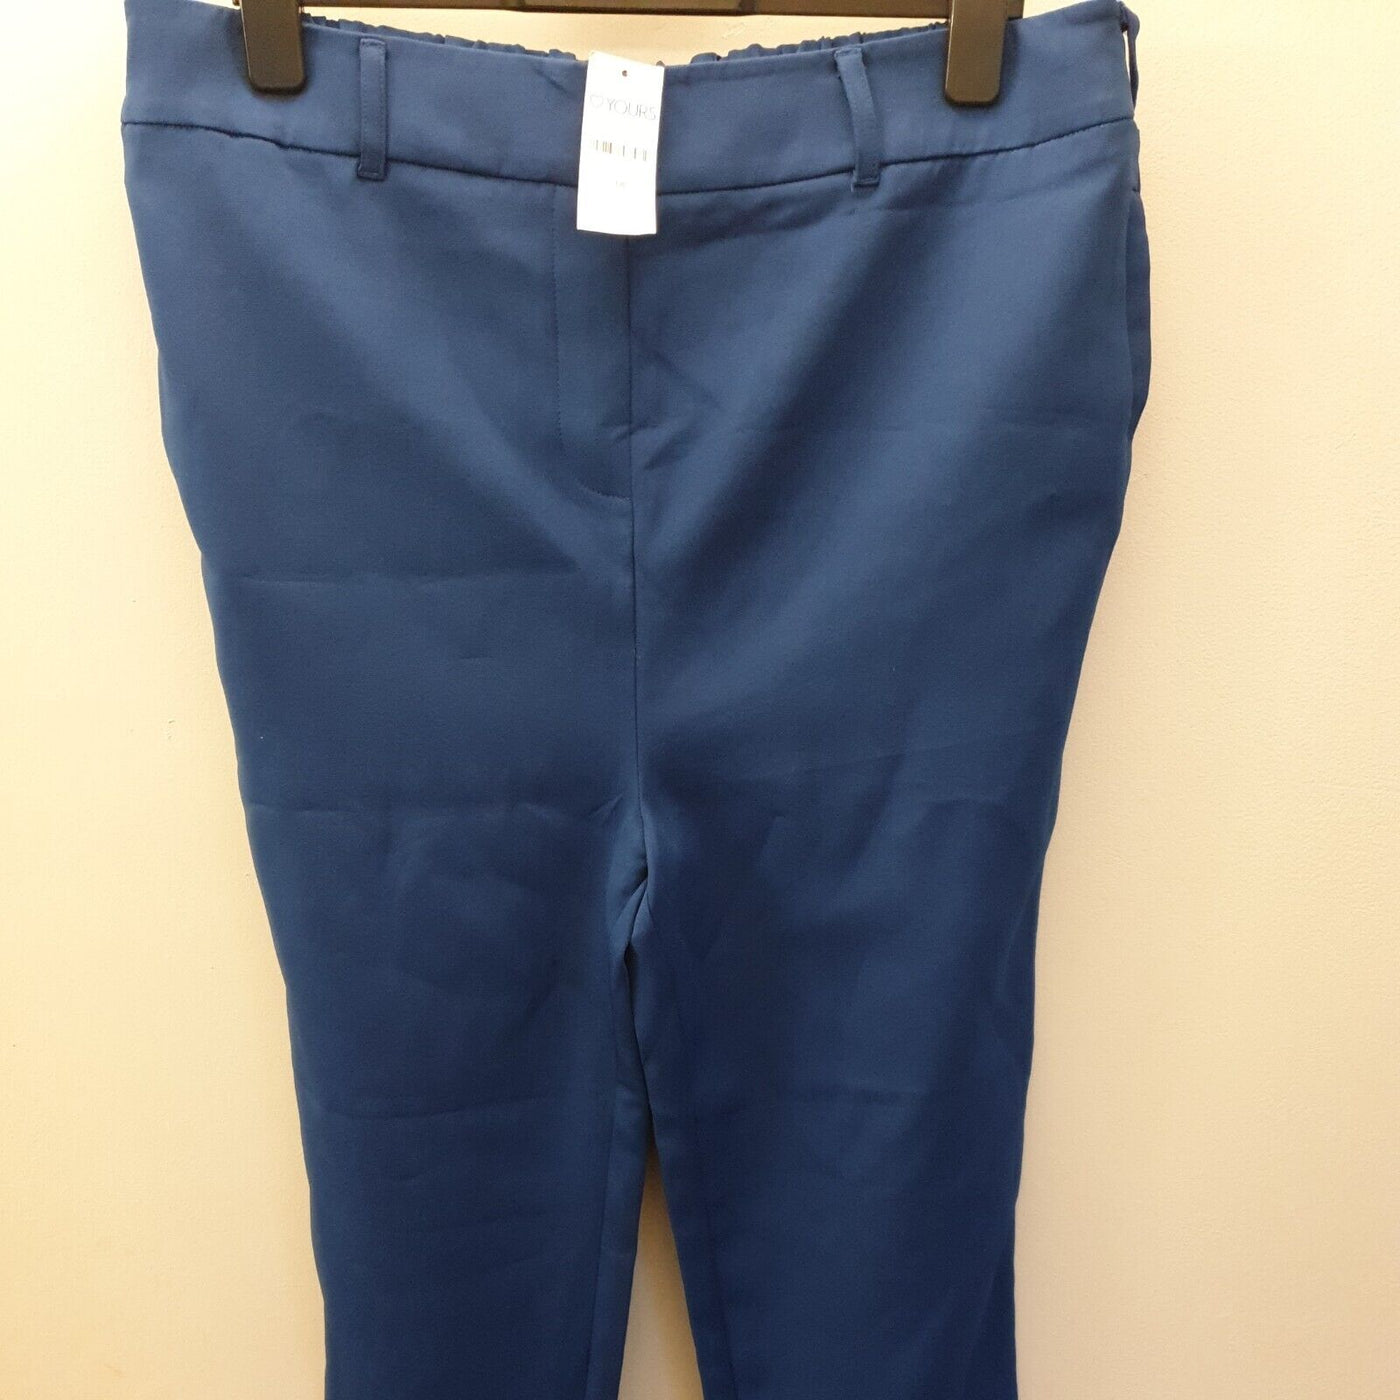 Yours Royal Blue Trousers Size 16****Ref V234